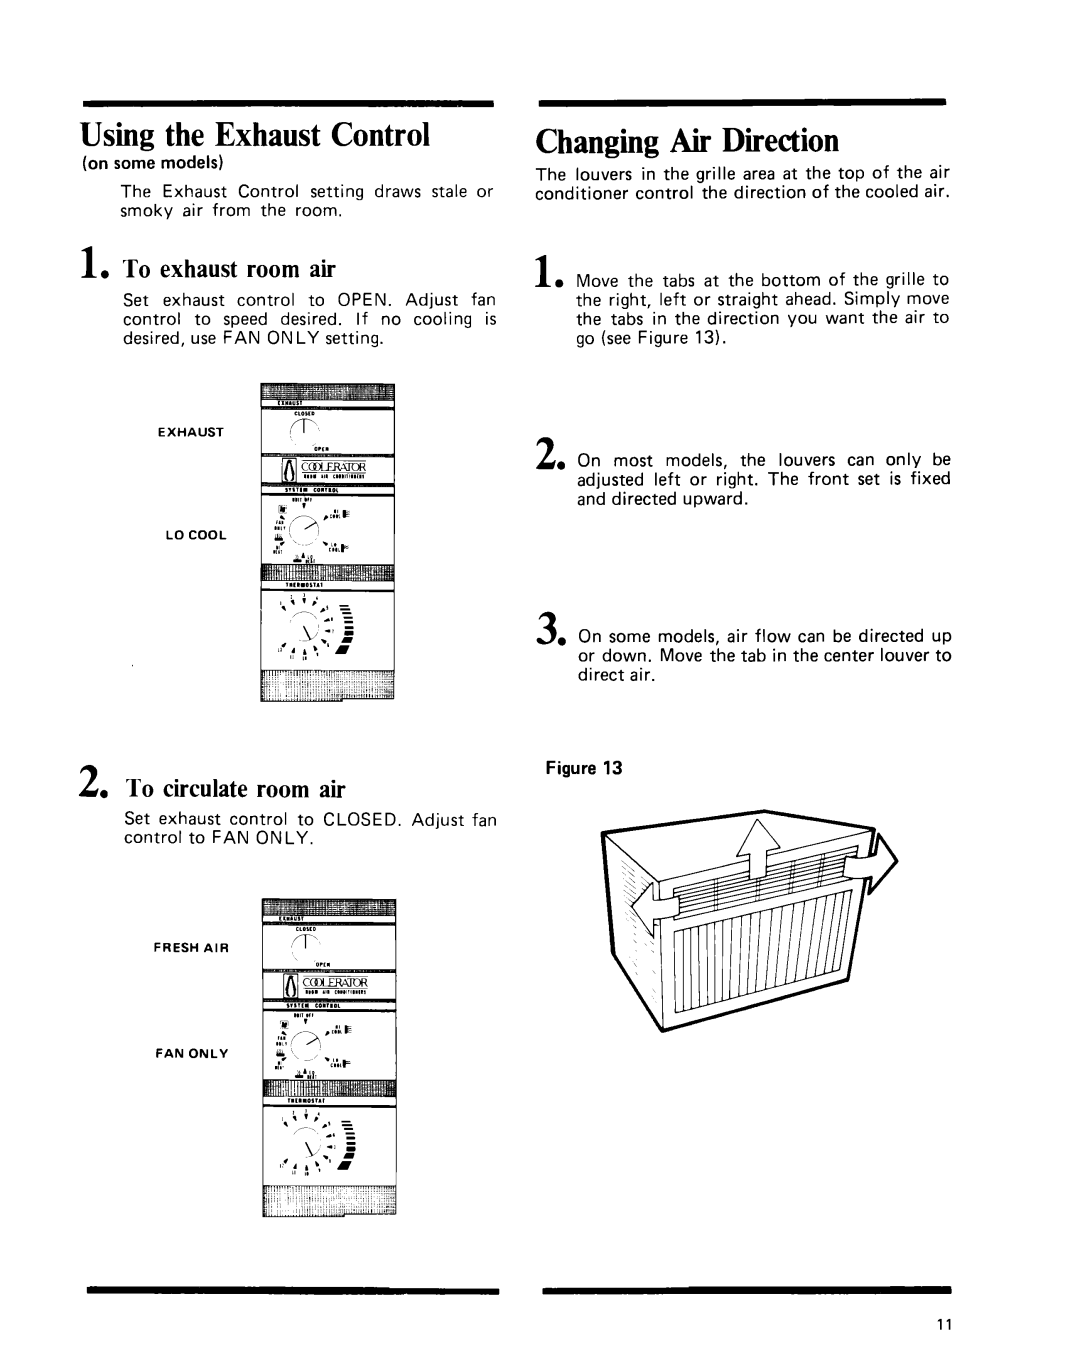 Whirlpool Air Conditioner manual ChangingAir Direction, 2l To circulate room airFigure, To exhaust room air 